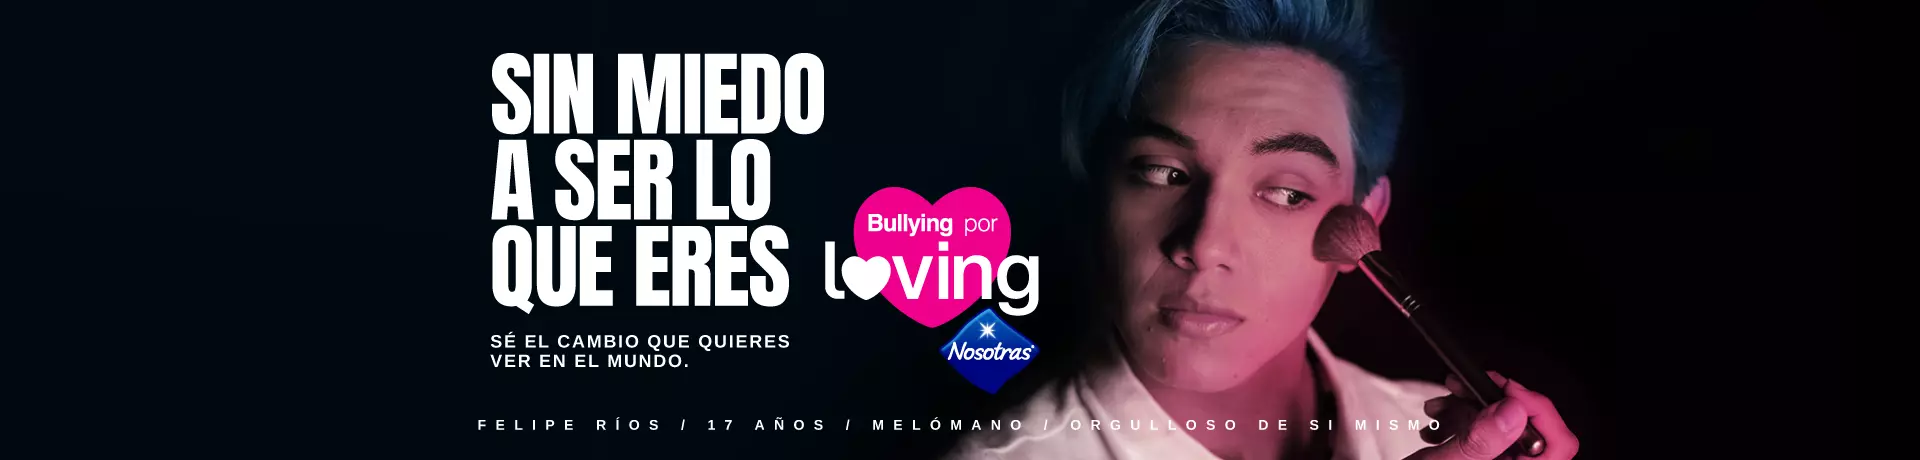 Banner lanzamiento campaña Bullying for Loving 